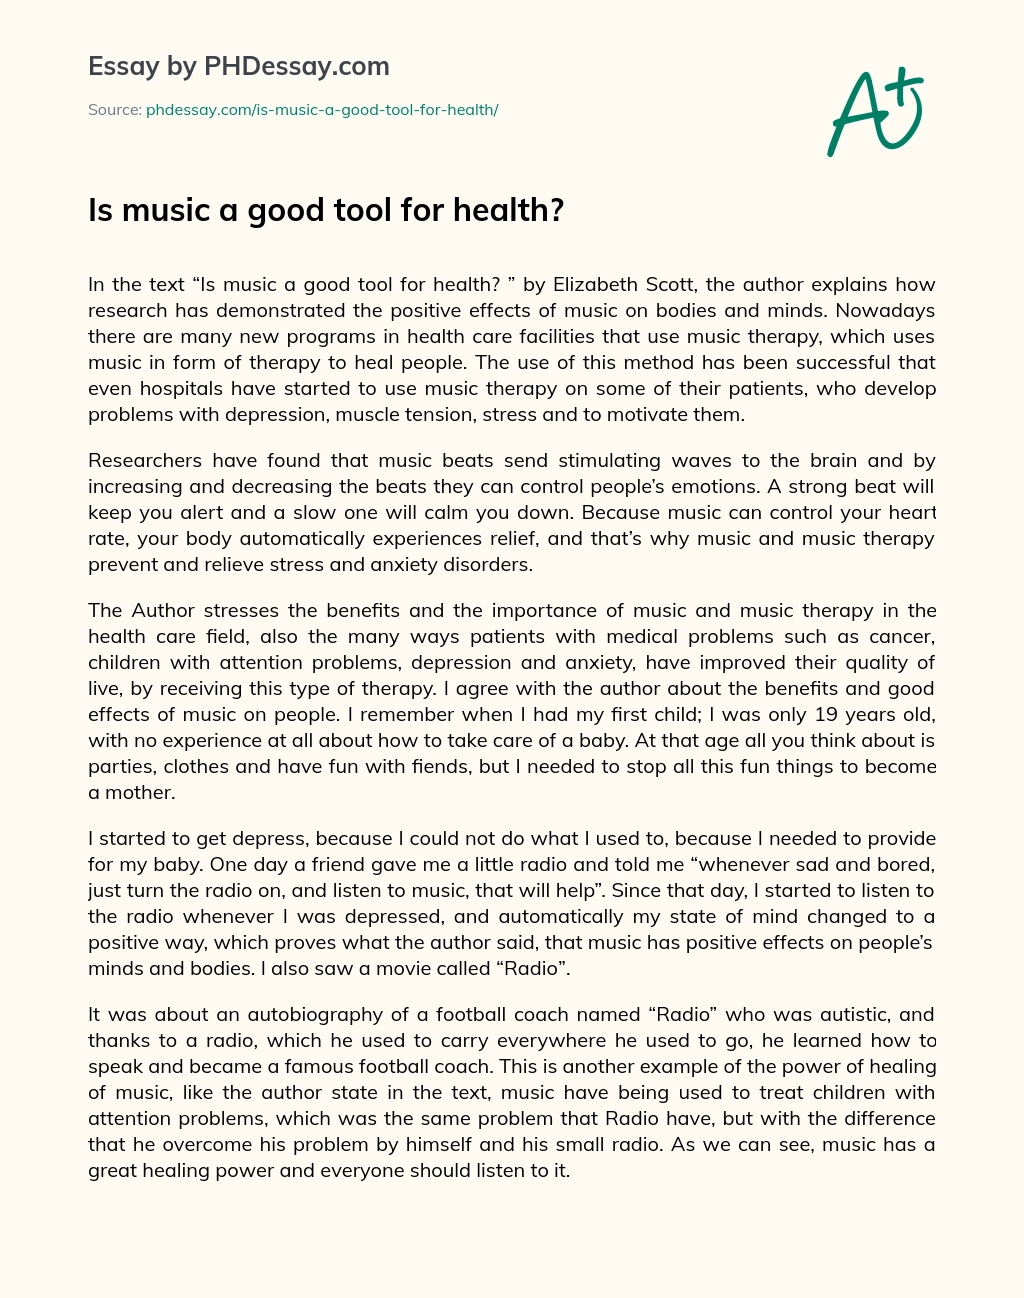 Is music a good tool for health? essay